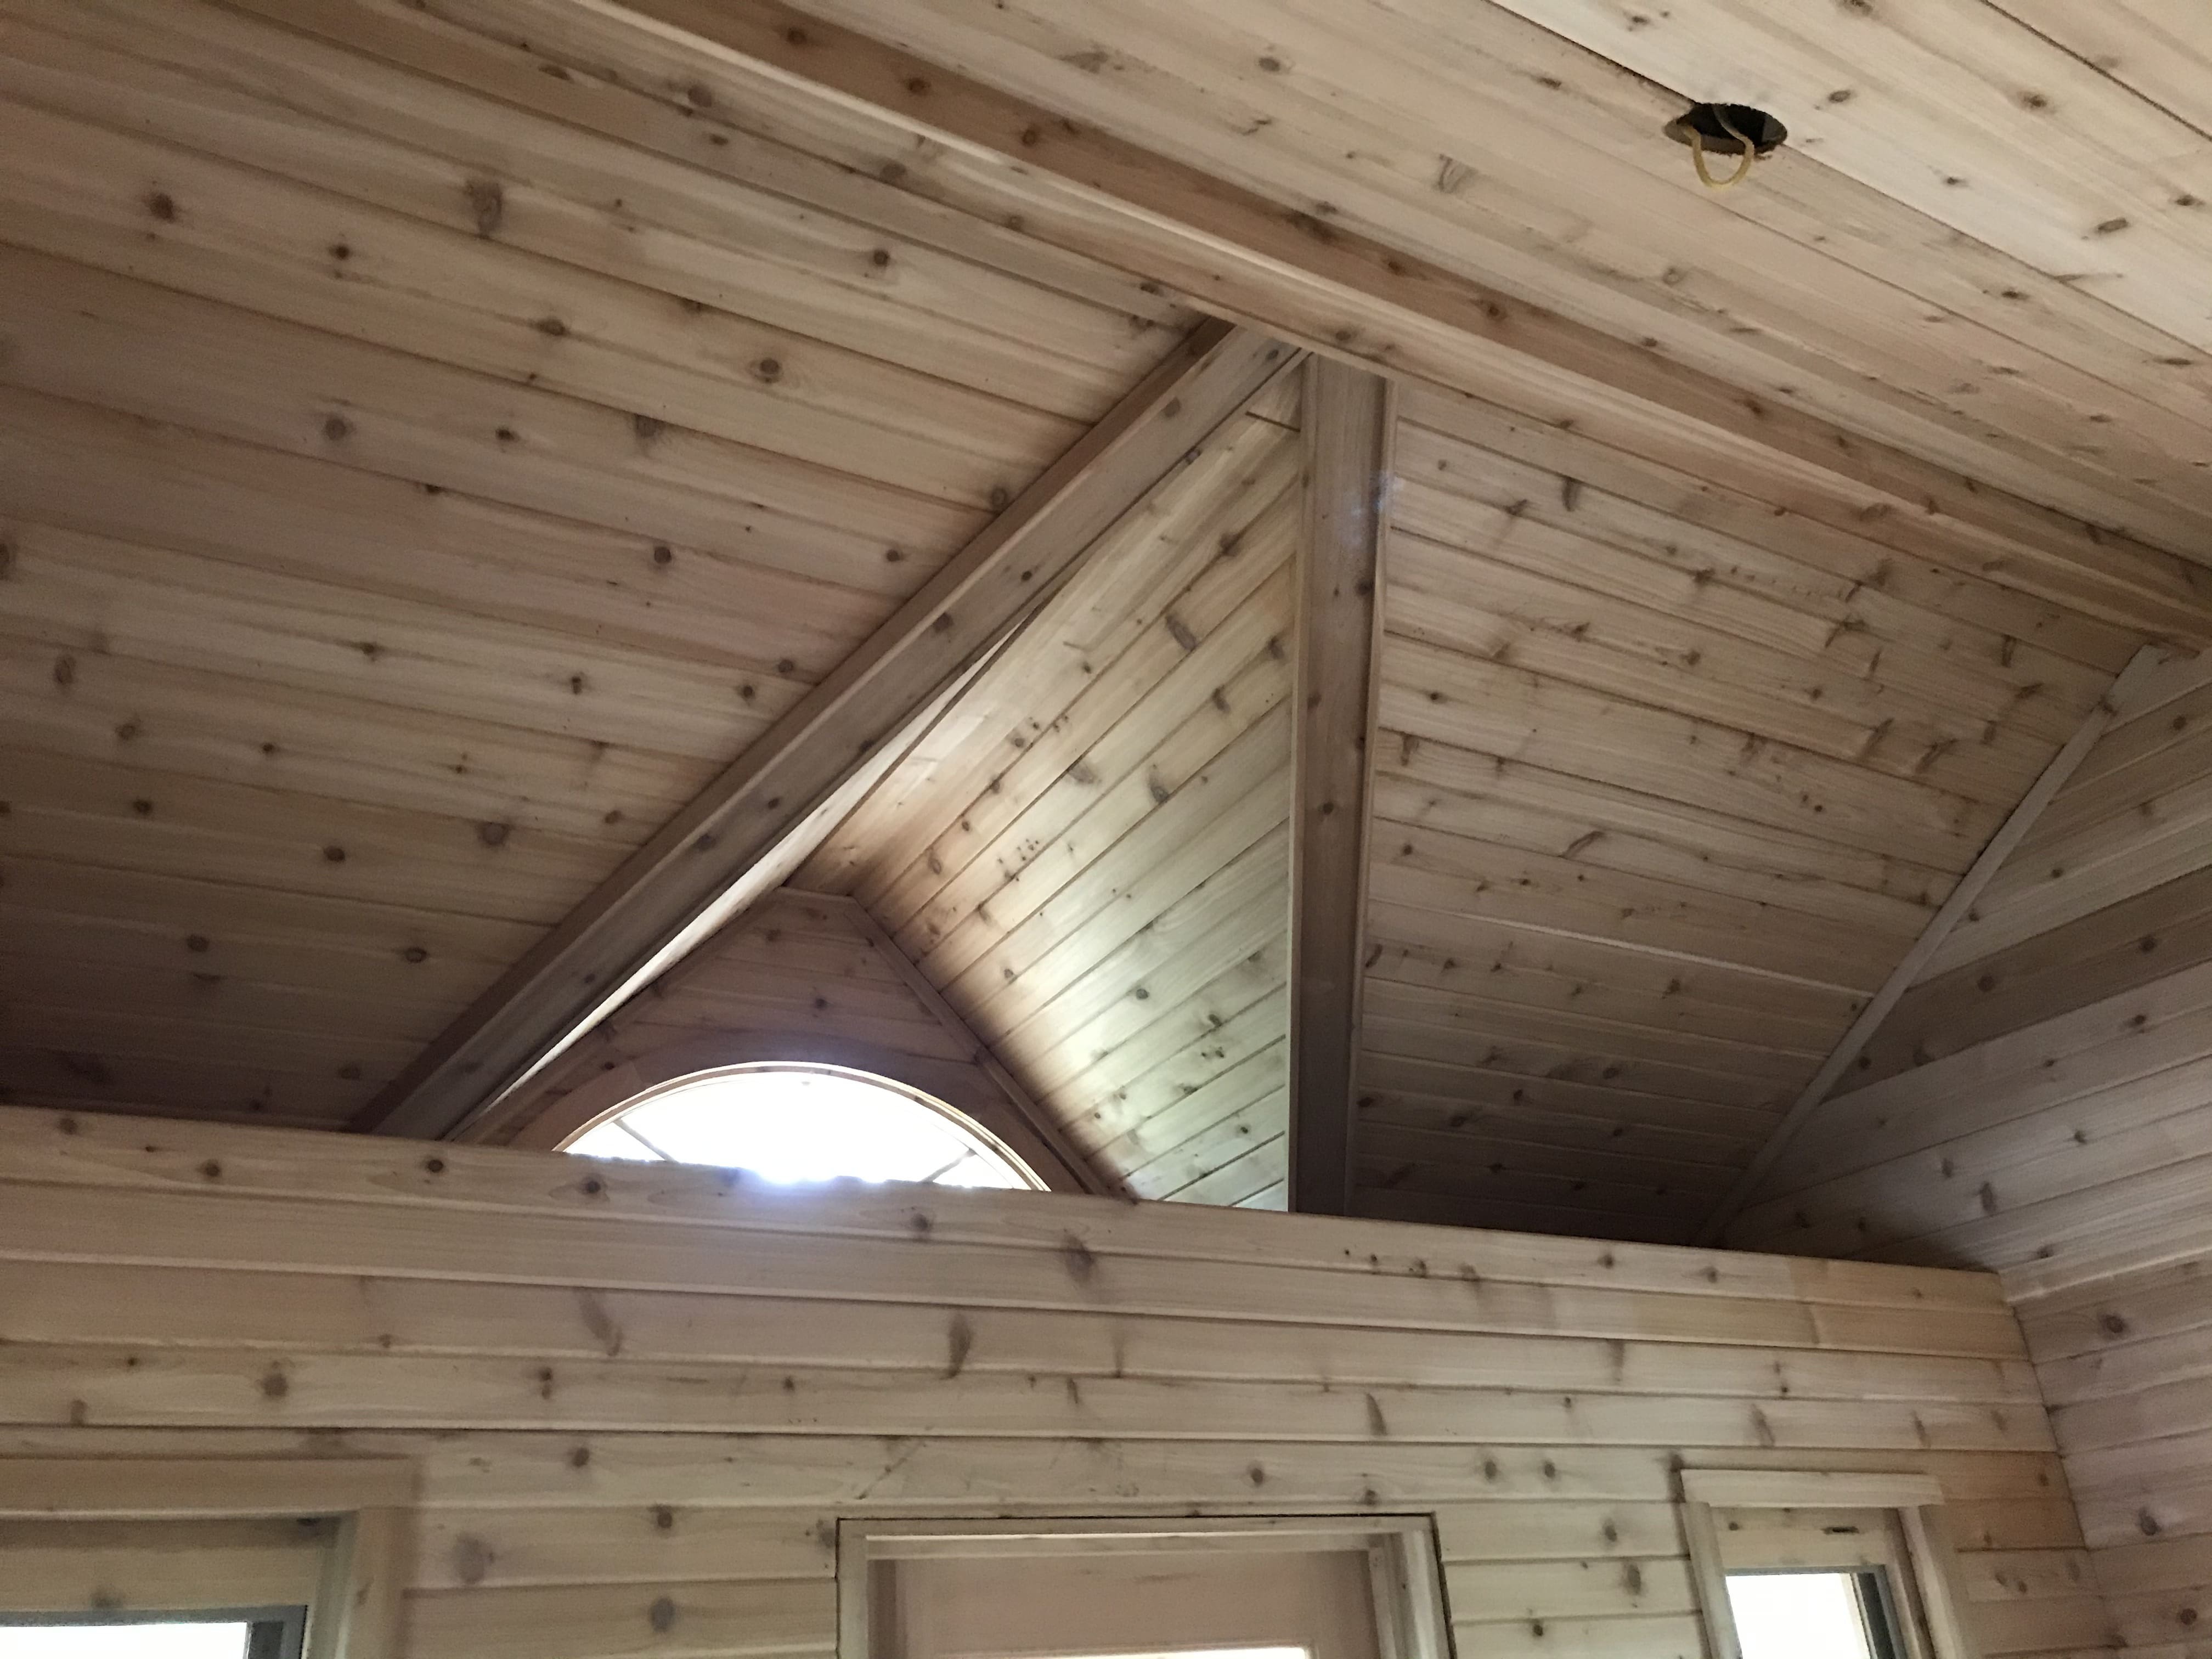 14' x 16' Canmore Log Cabin